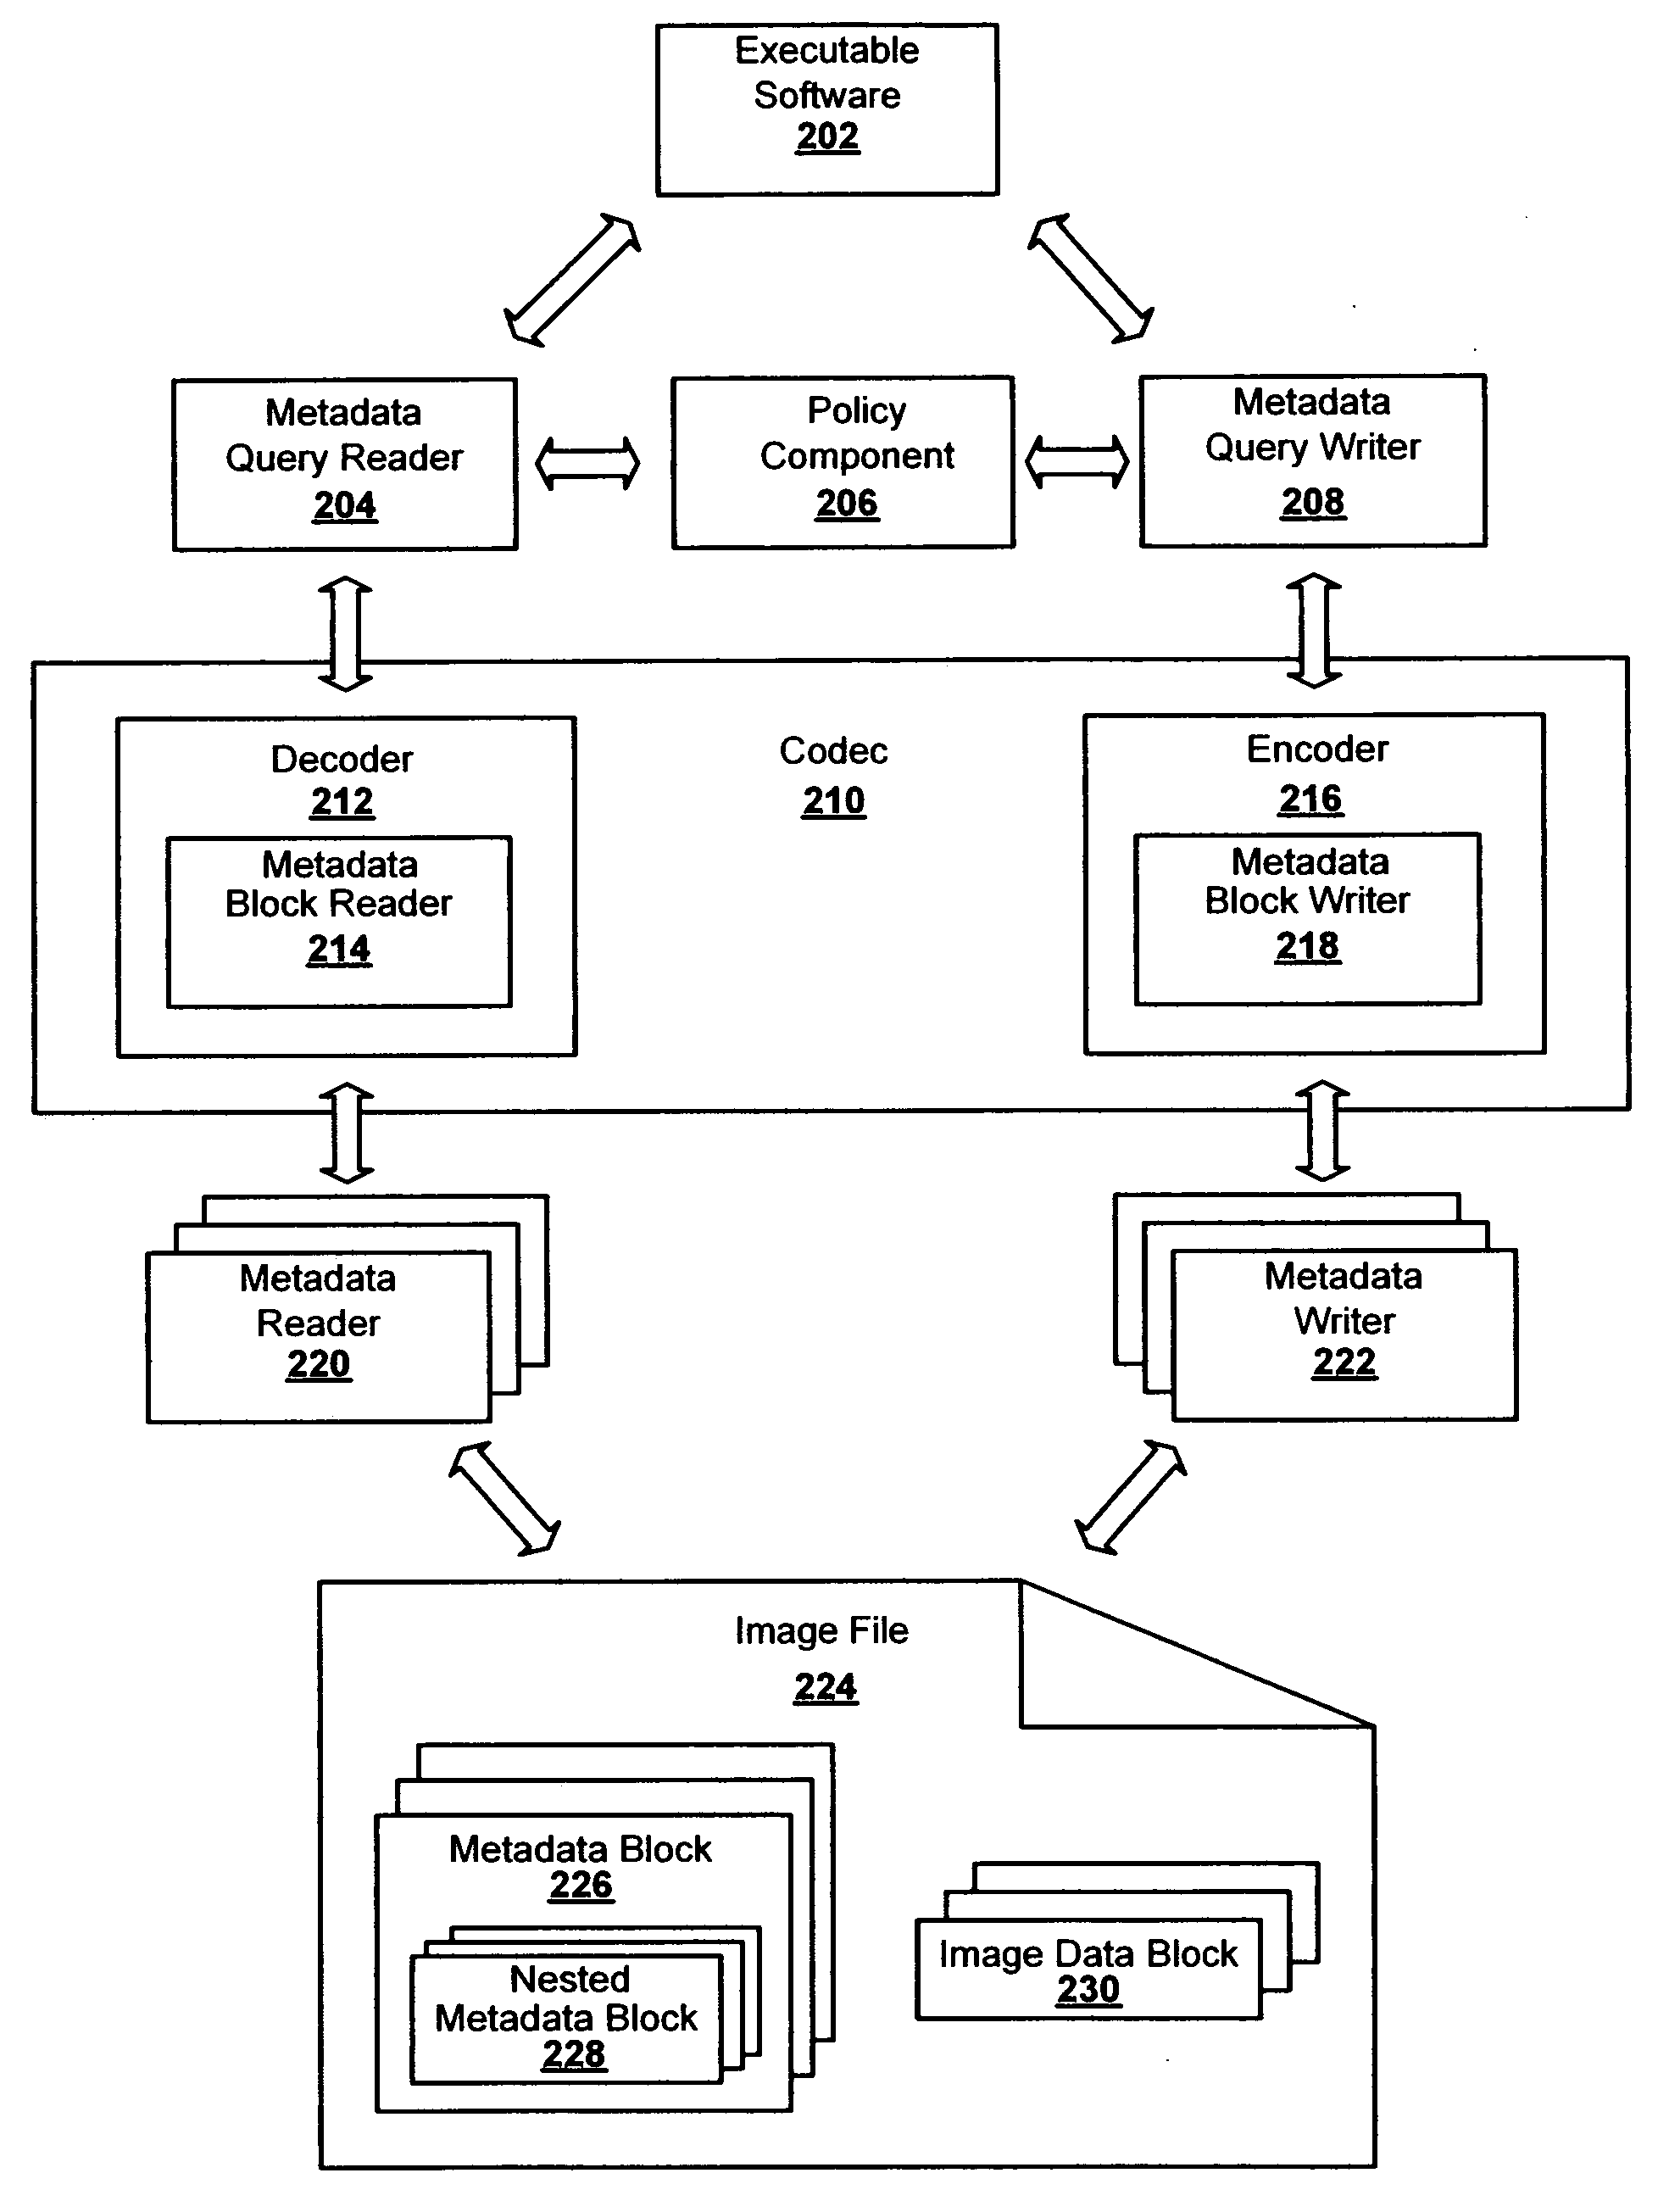 System and method for extensible metadata architecture for digital images